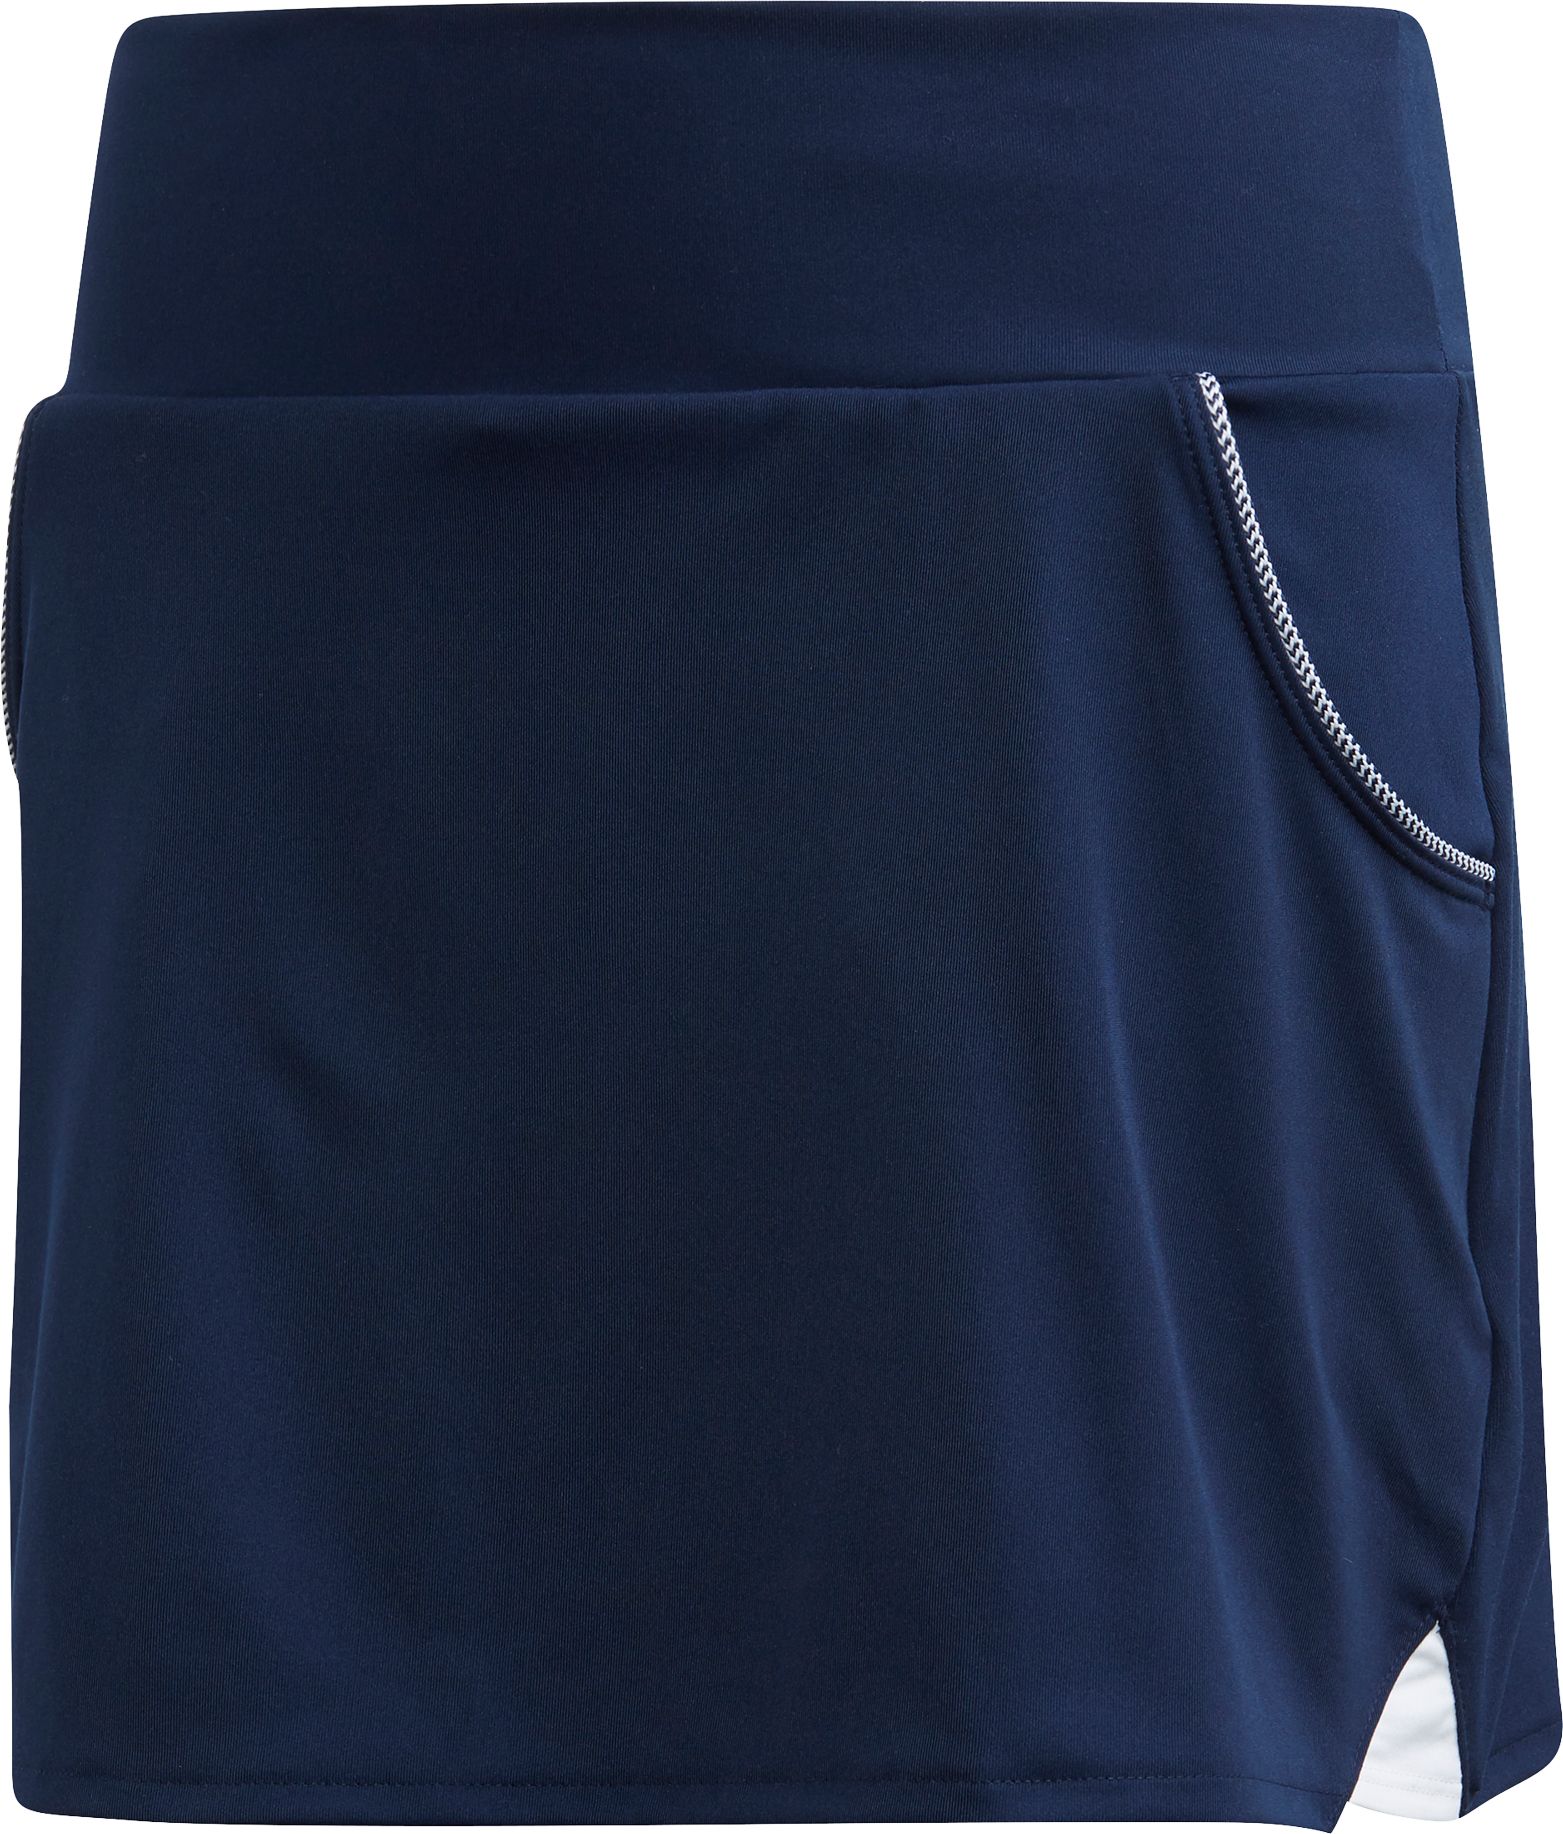 adidas tennis skirt with pockets